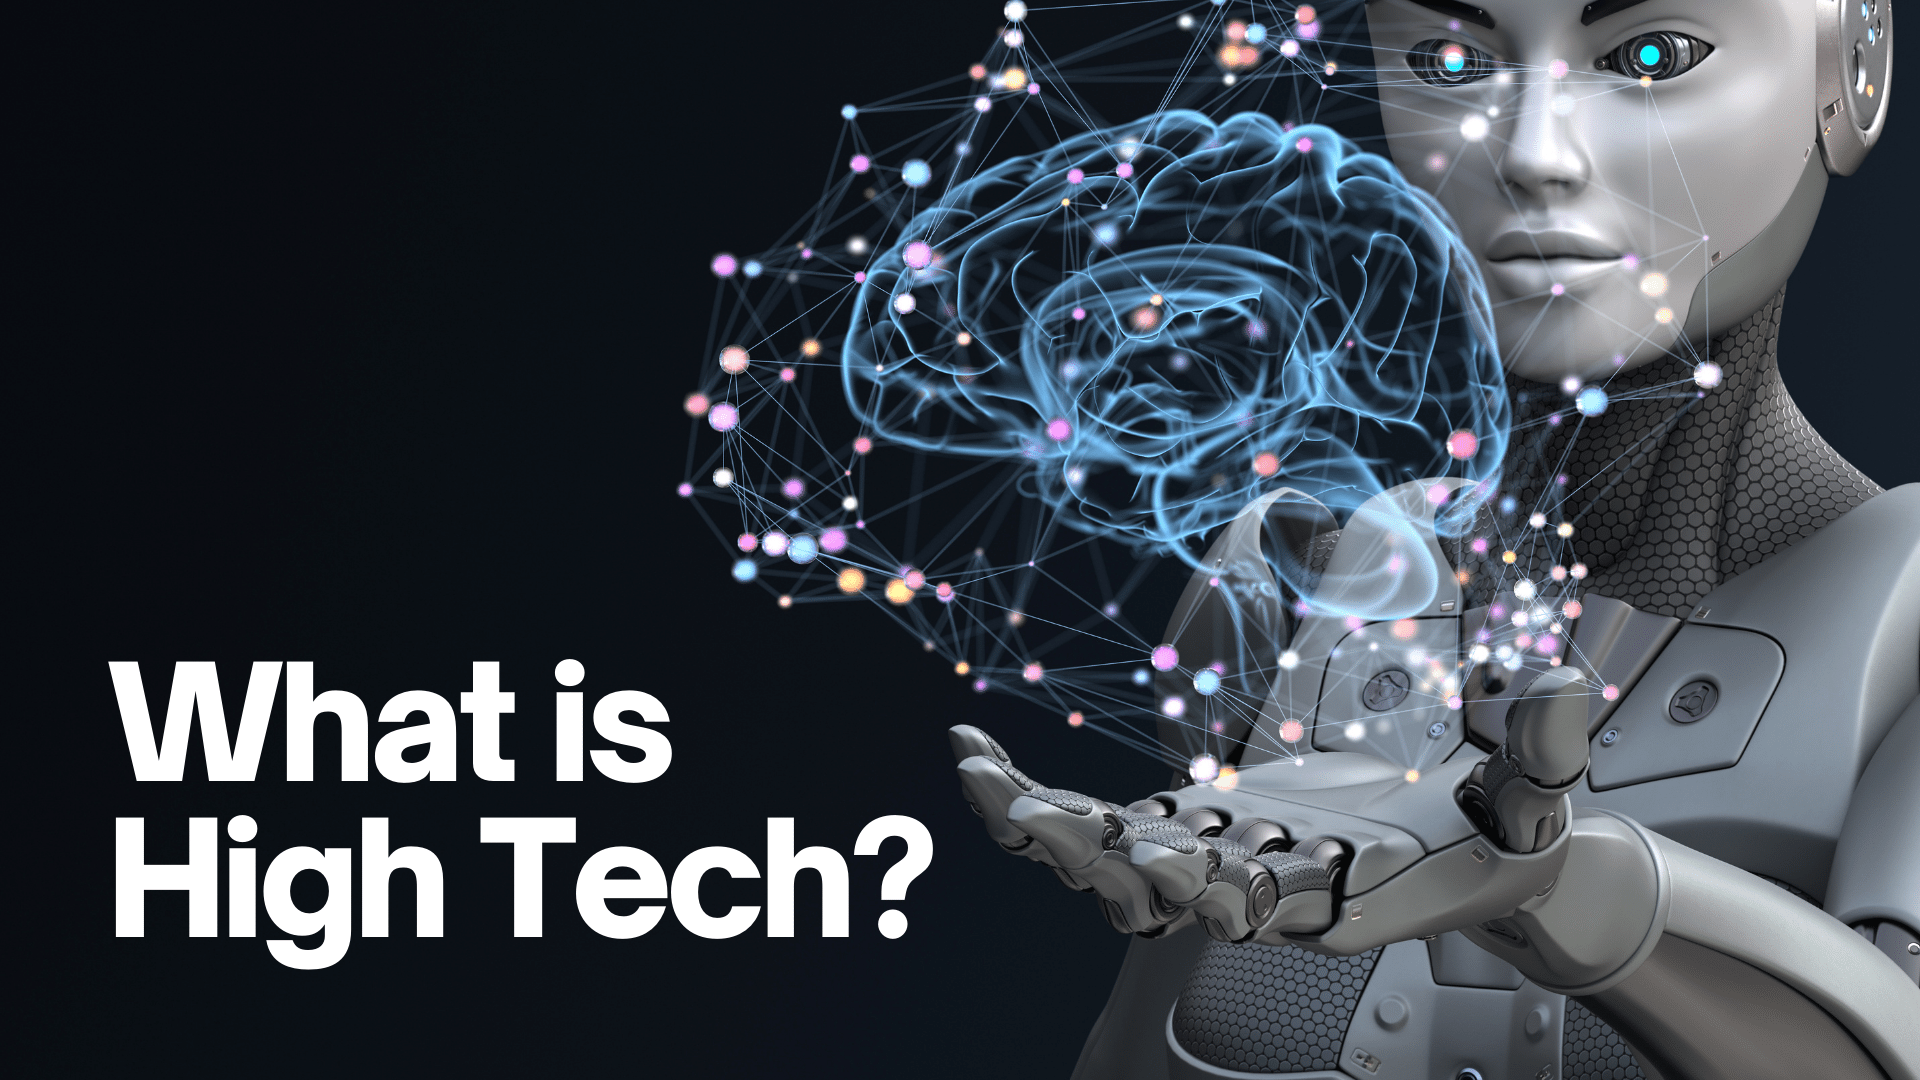 What Does High Tech Mean?